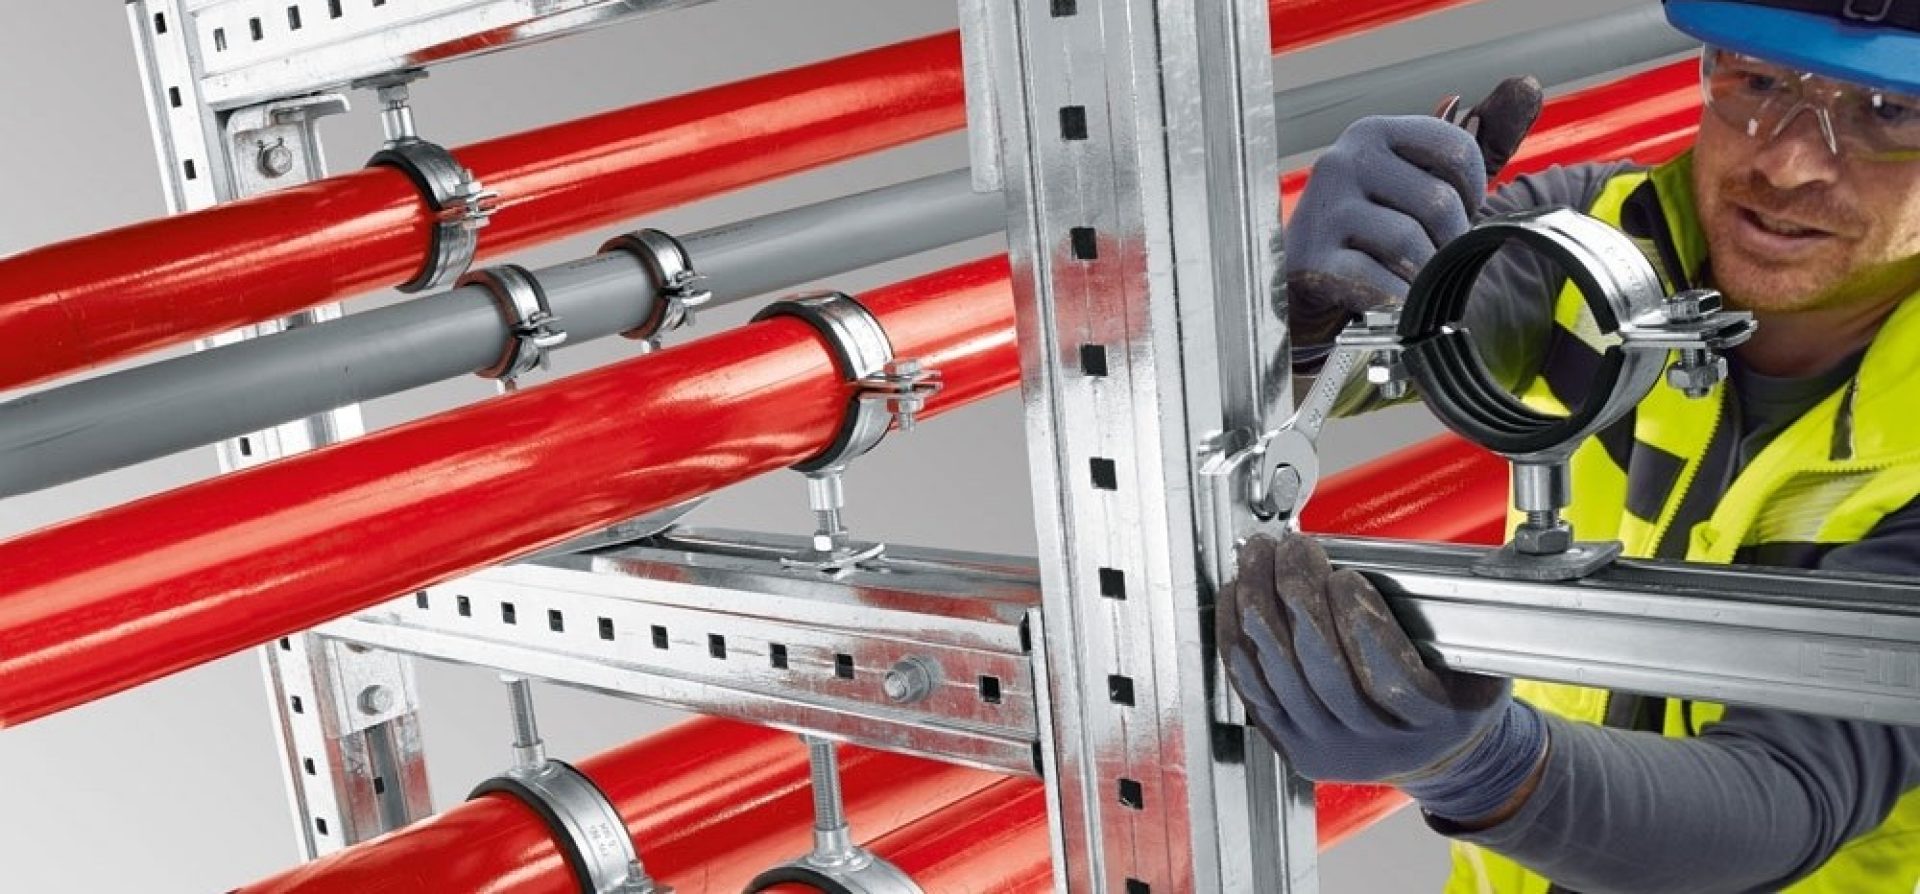 At Hilti we offer a complete solution for hanging and fixing pipes and instruments for mechanical, electrical and industrial trades.